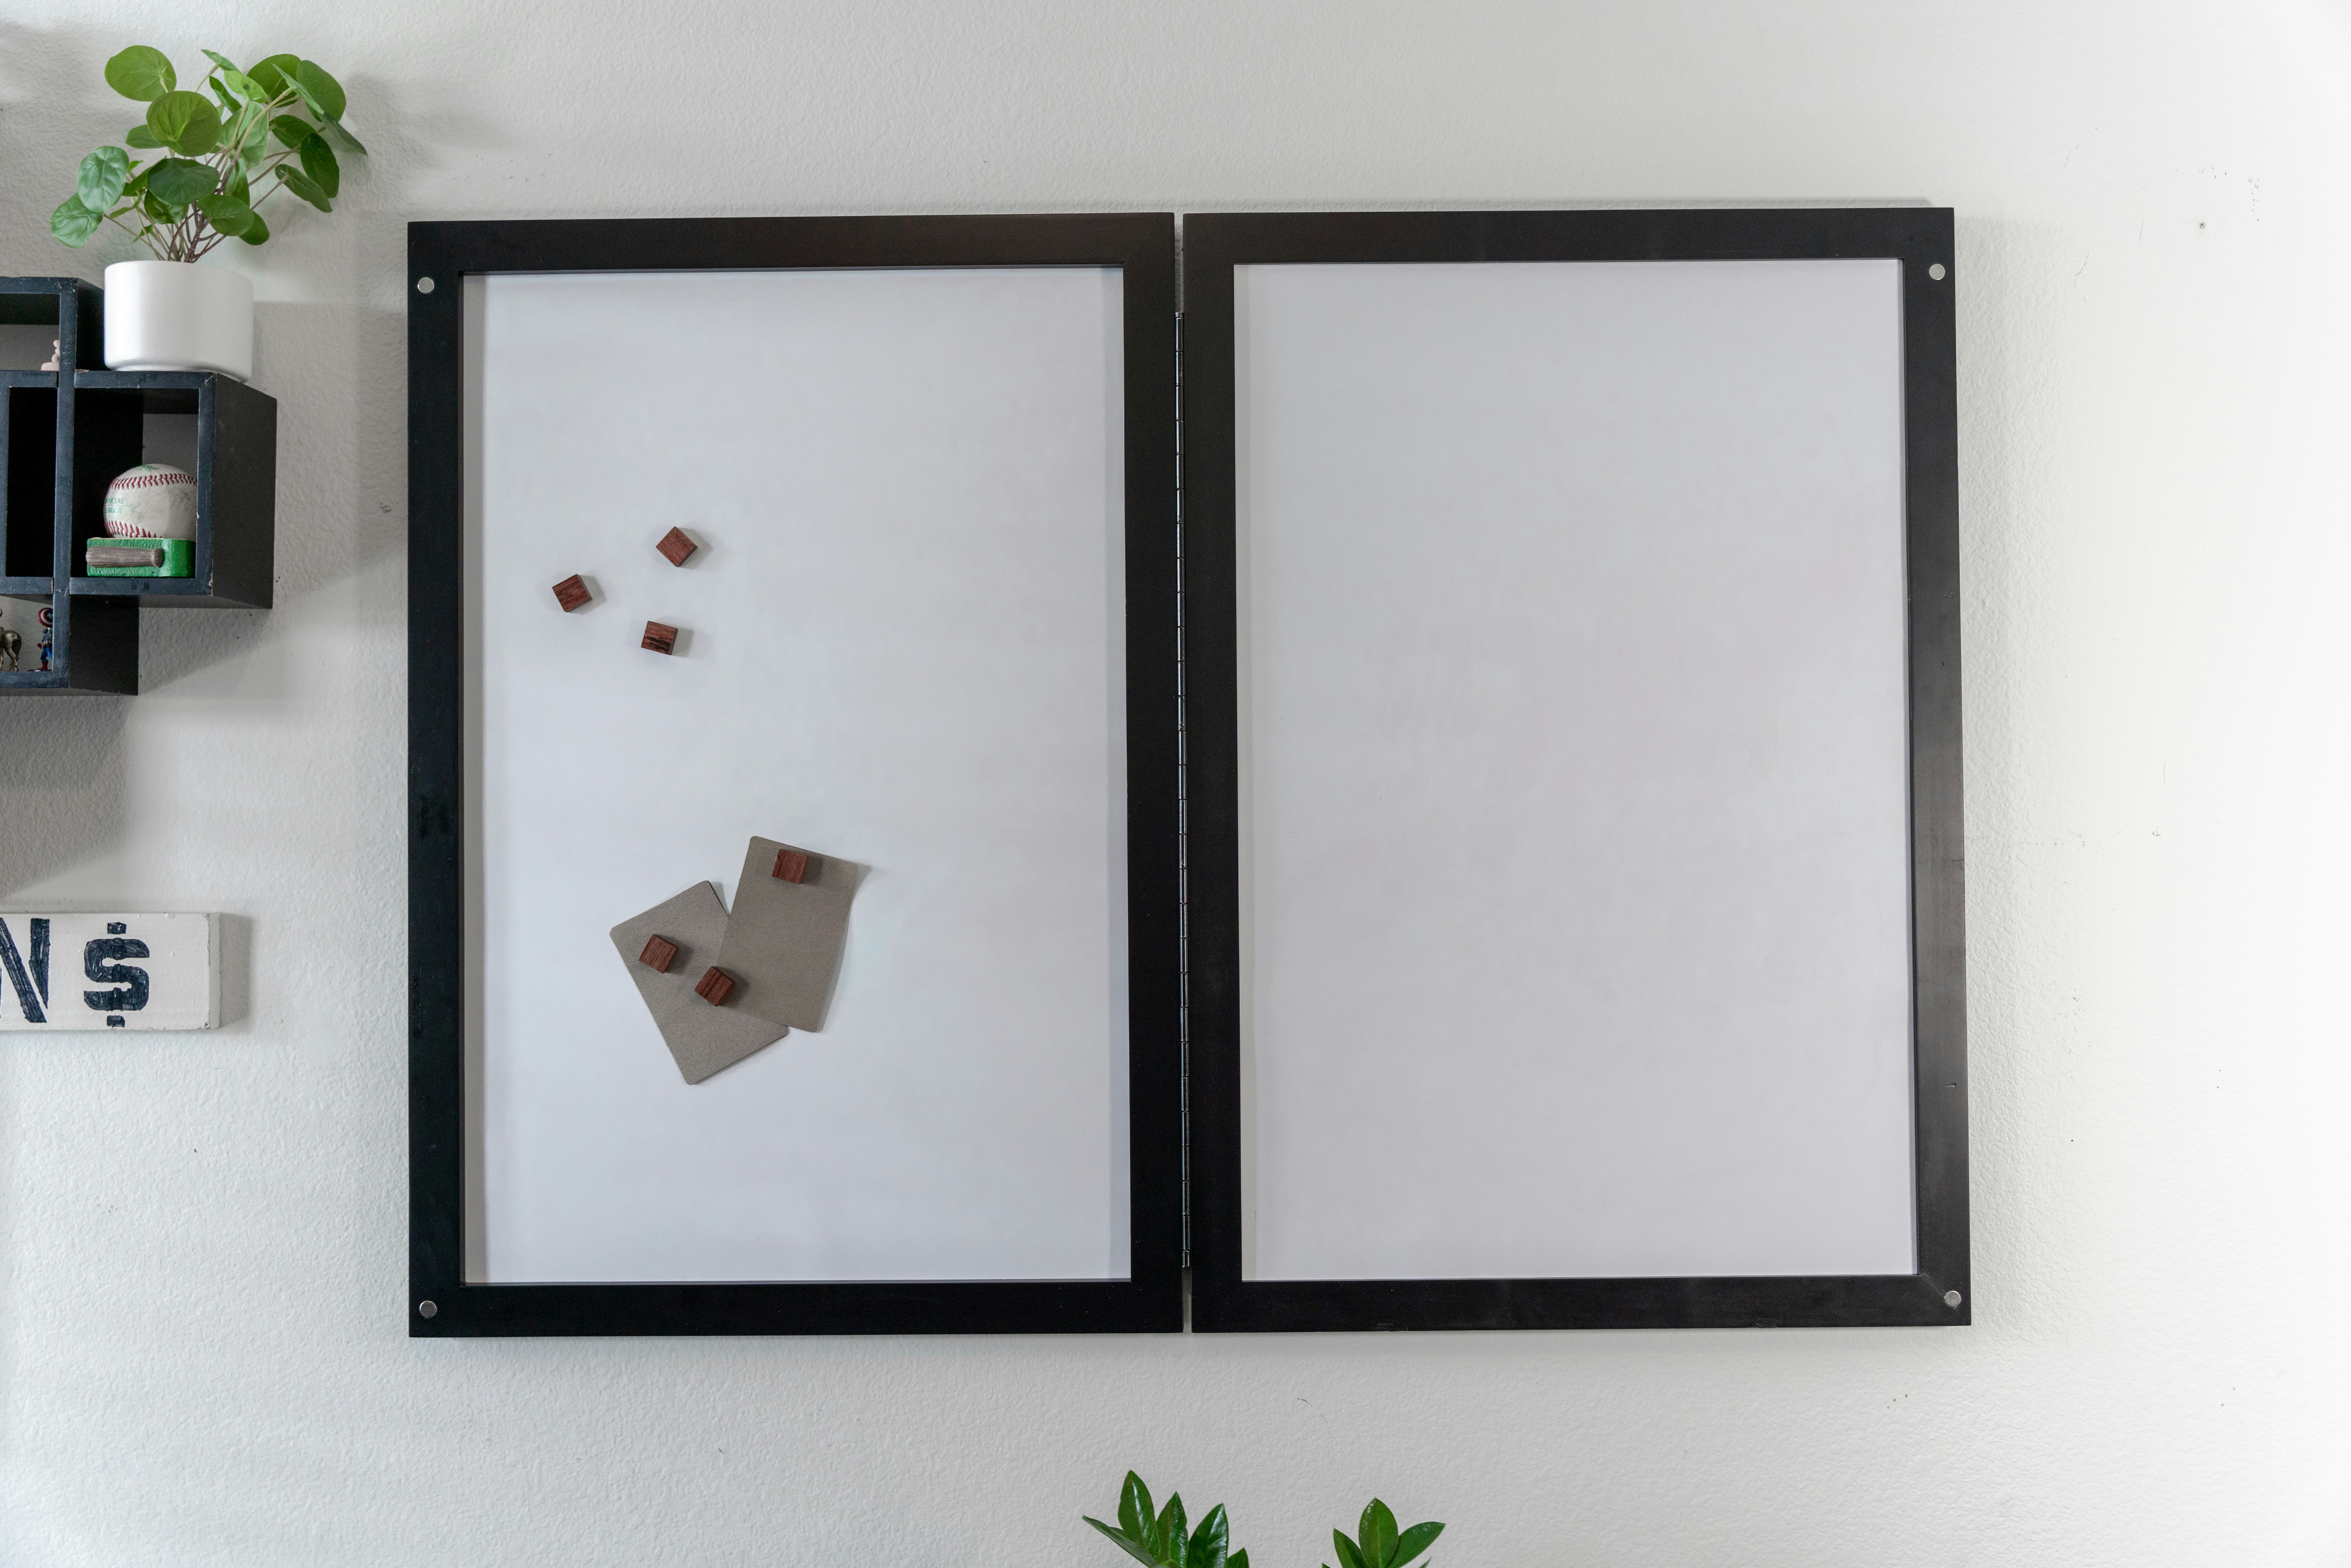 A dry erase board mounted on a white wall